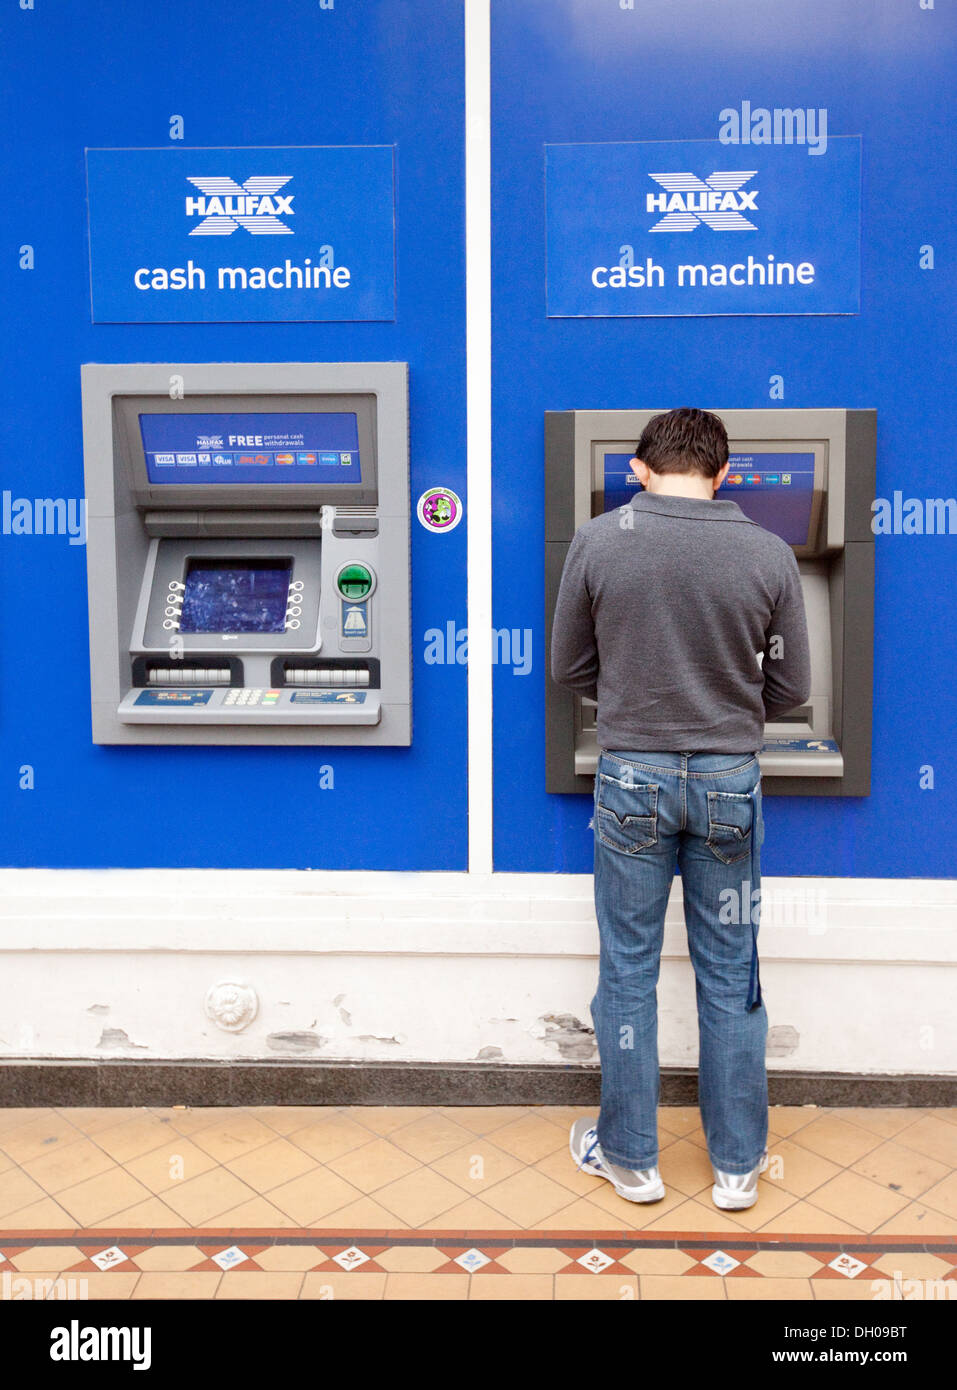 A man getting cash from a Halifax bank ATM cash machine, Norwich UK Stock Photo